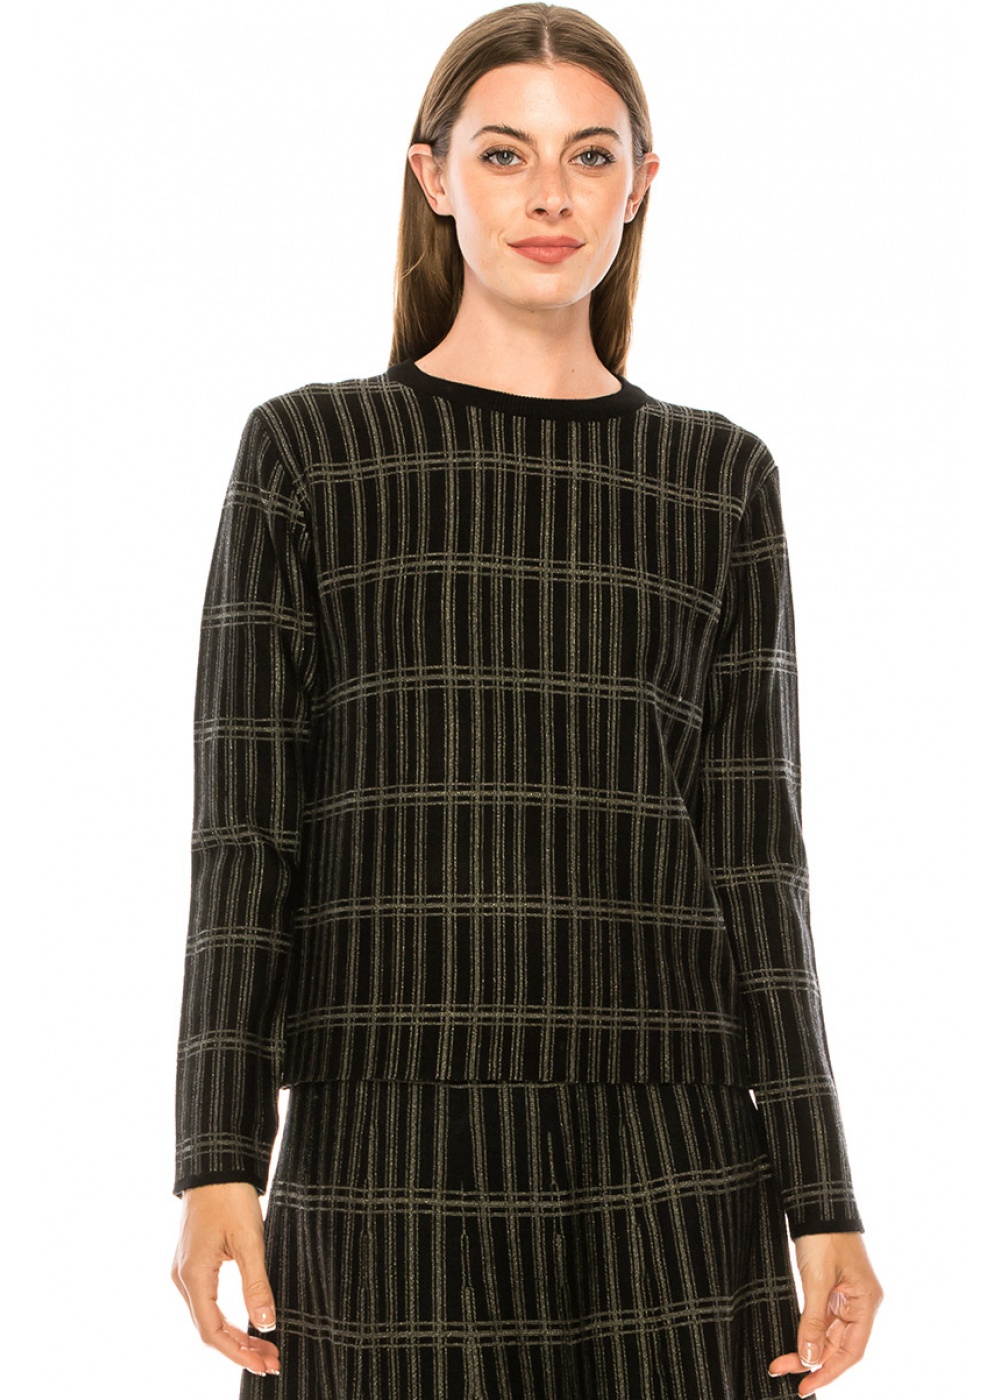 Silver lurex check printed sweater